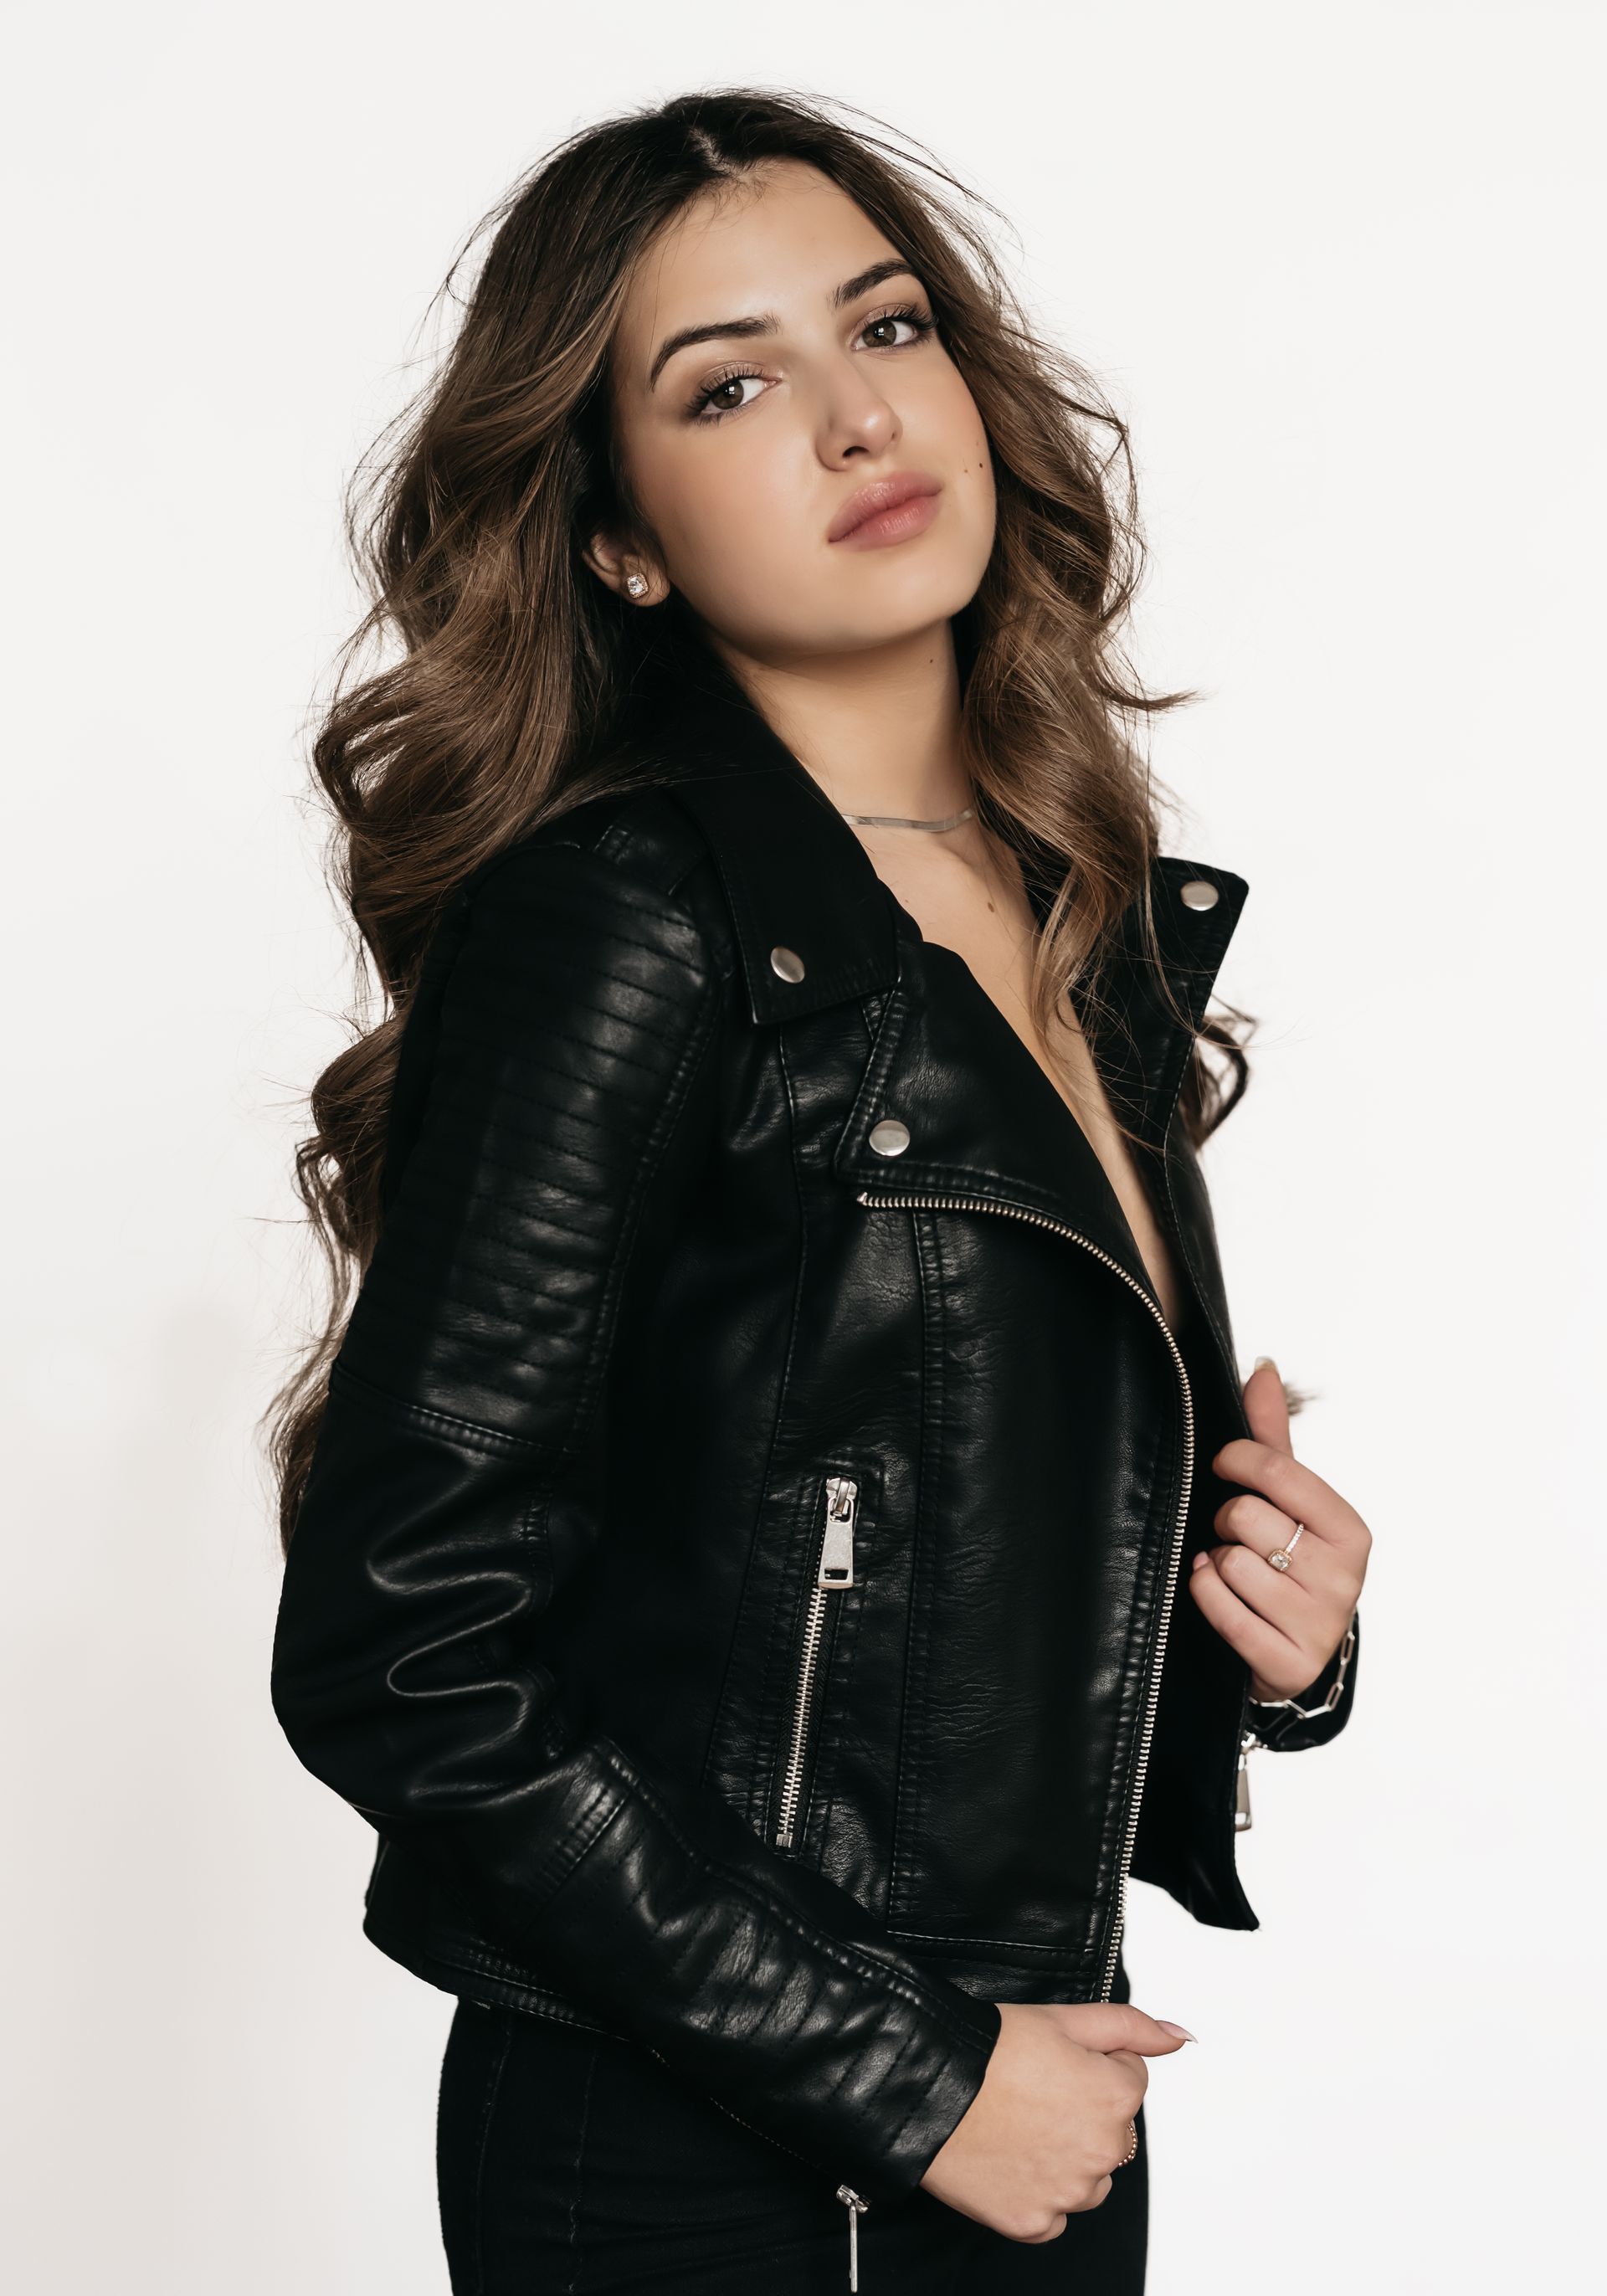 woman with long wavy hair wearing black leather jacket looking at the camera